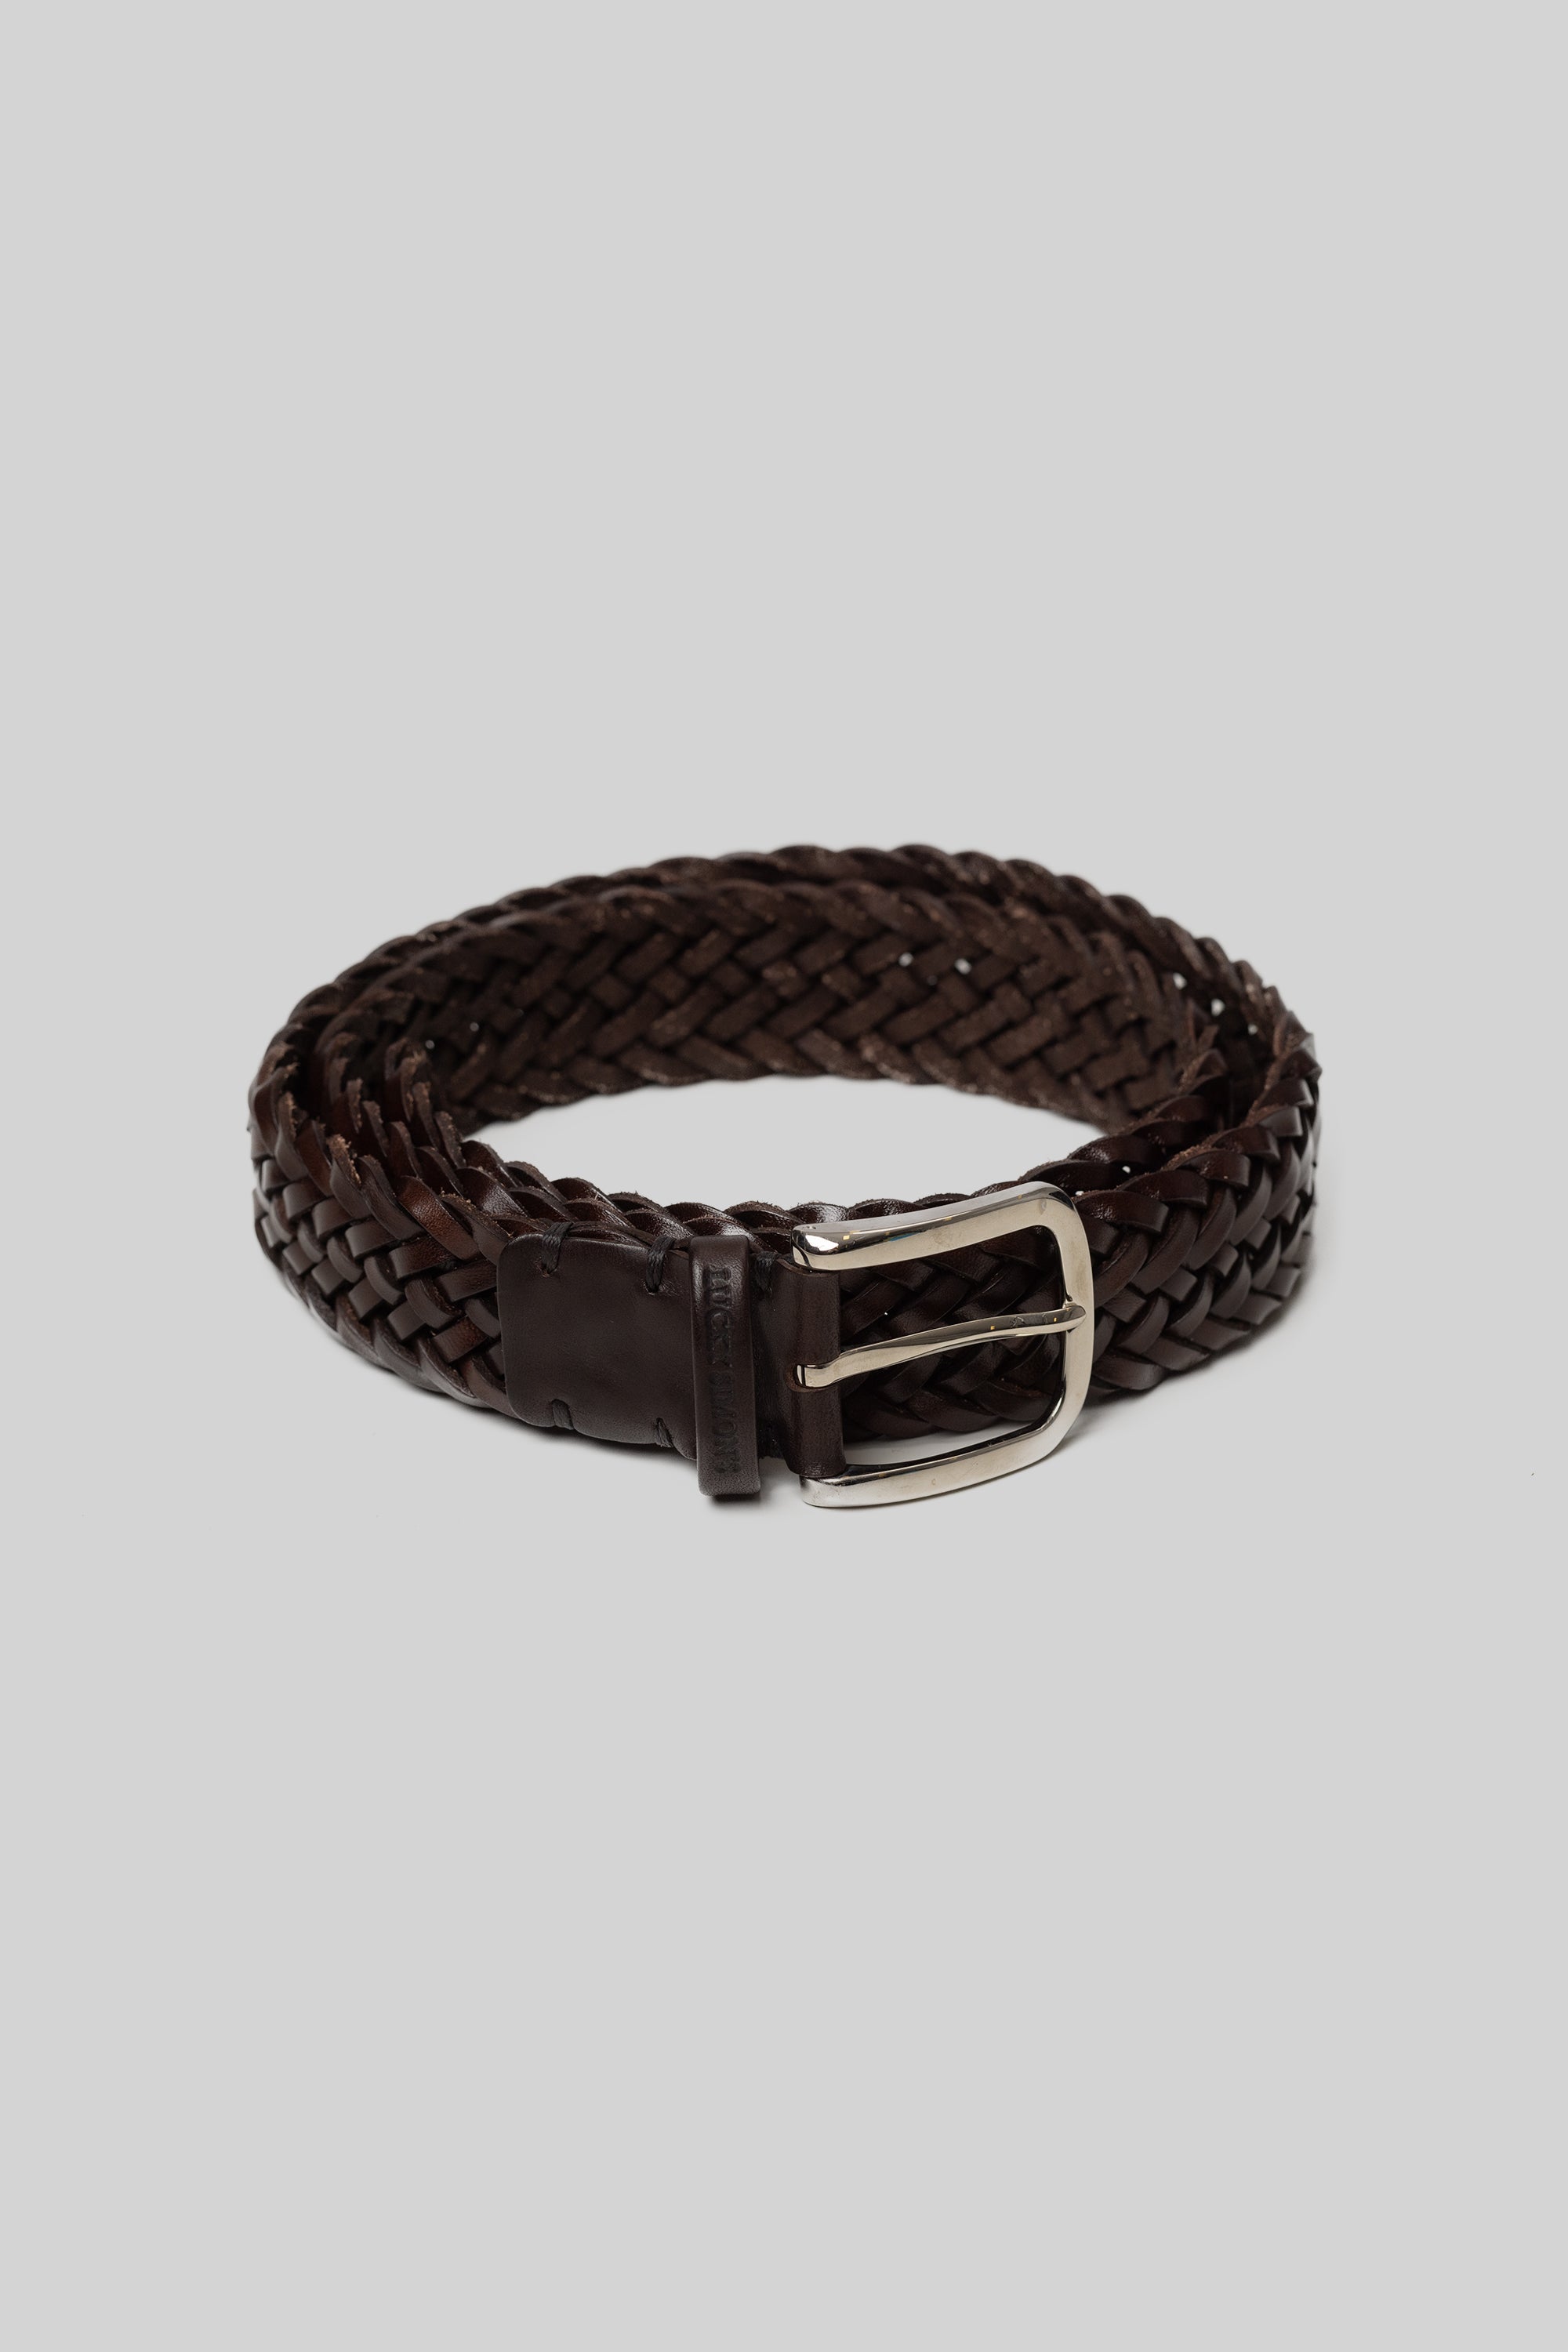 WOVEN HAND MADE LEATHER BELT